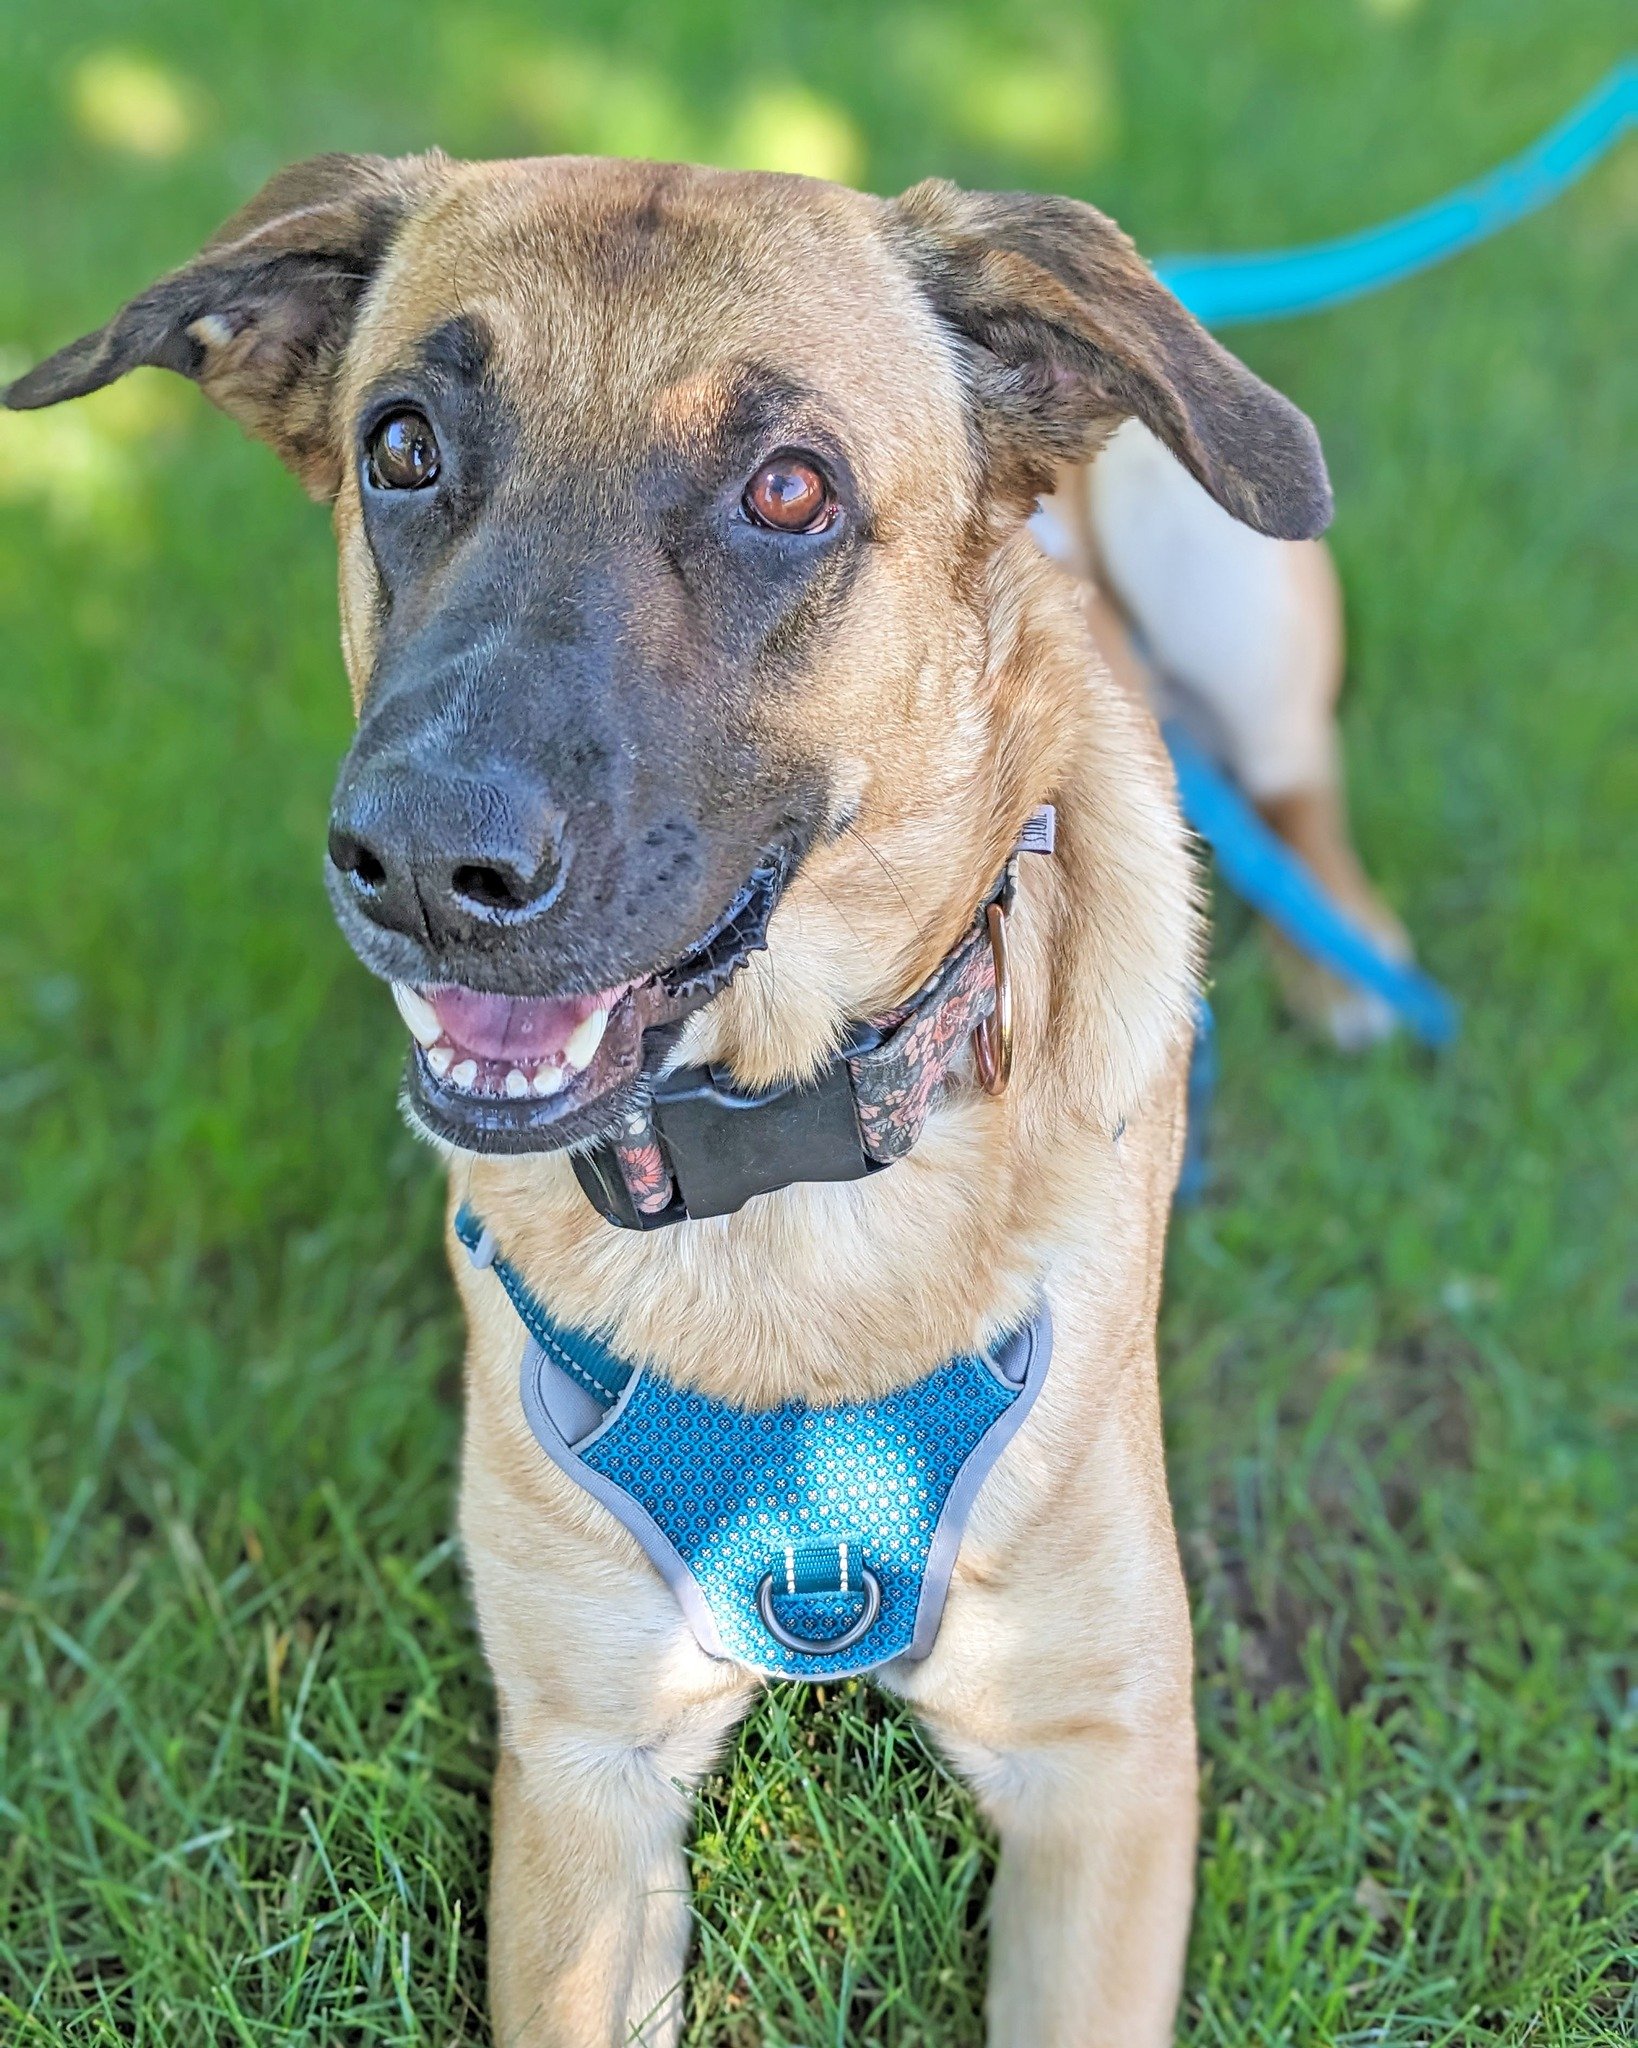 Prepare yourself for this ADORABLE and ADOPTABLE babe 😍  Meet Millie, a young adult female GSD x Anatolian Shepherd (best guesses). We have been blessed to be a part of Millie's training journey with her fosters.  Weighing in at around 70lbs, she is